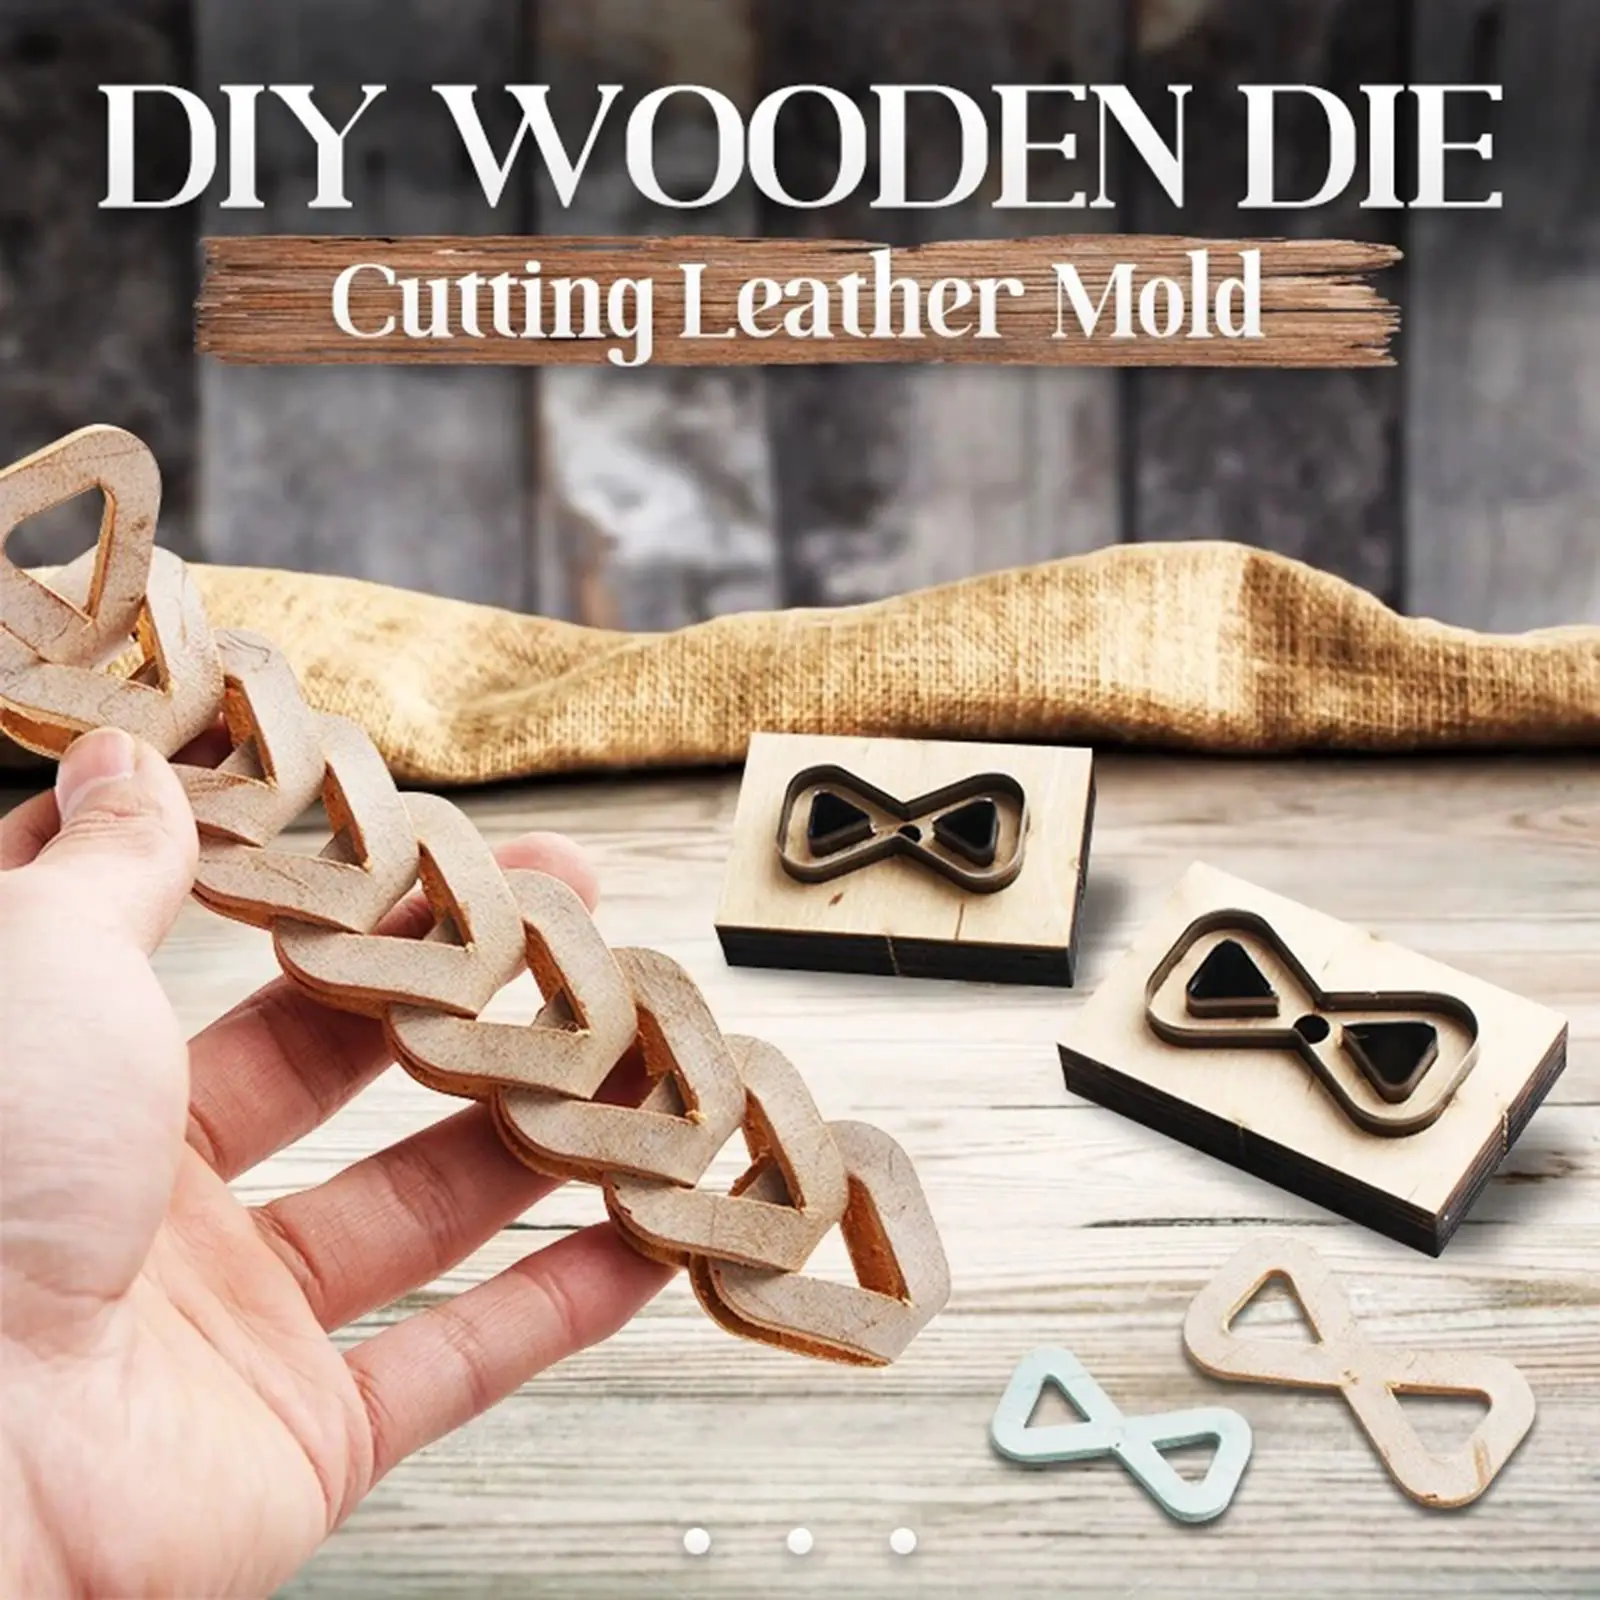 Multh-Purpose Cutting Dies Leather Mold Die Cuts Wooden Die Cutting Leather Mold Tool Cutting Mould Cutter Leather Cutting Tools